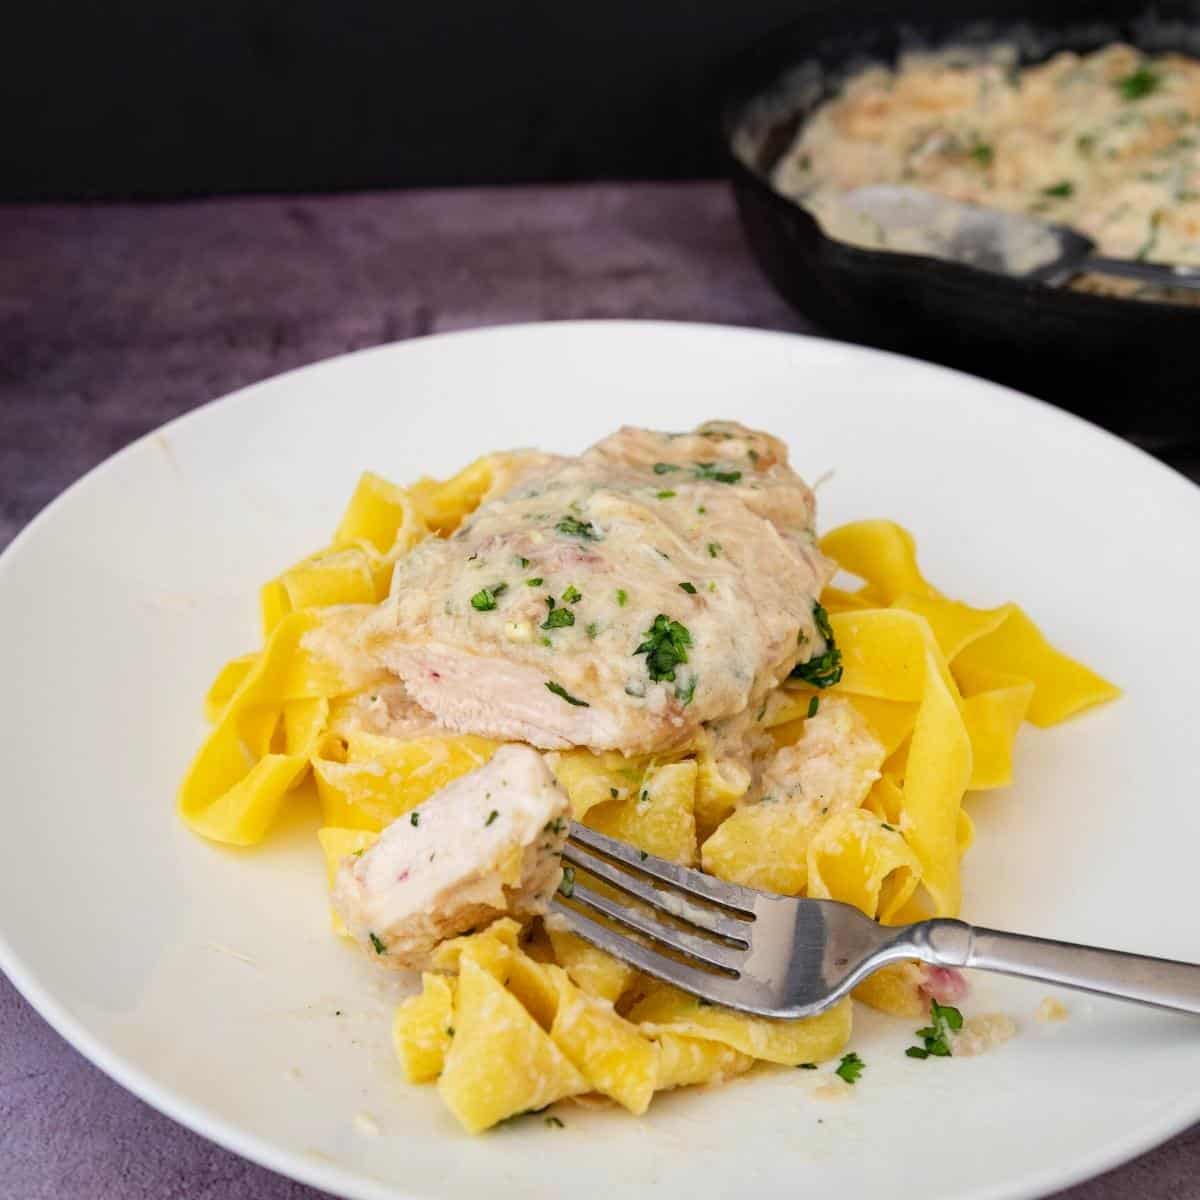 A plate with chicken with white sauce over pasta.